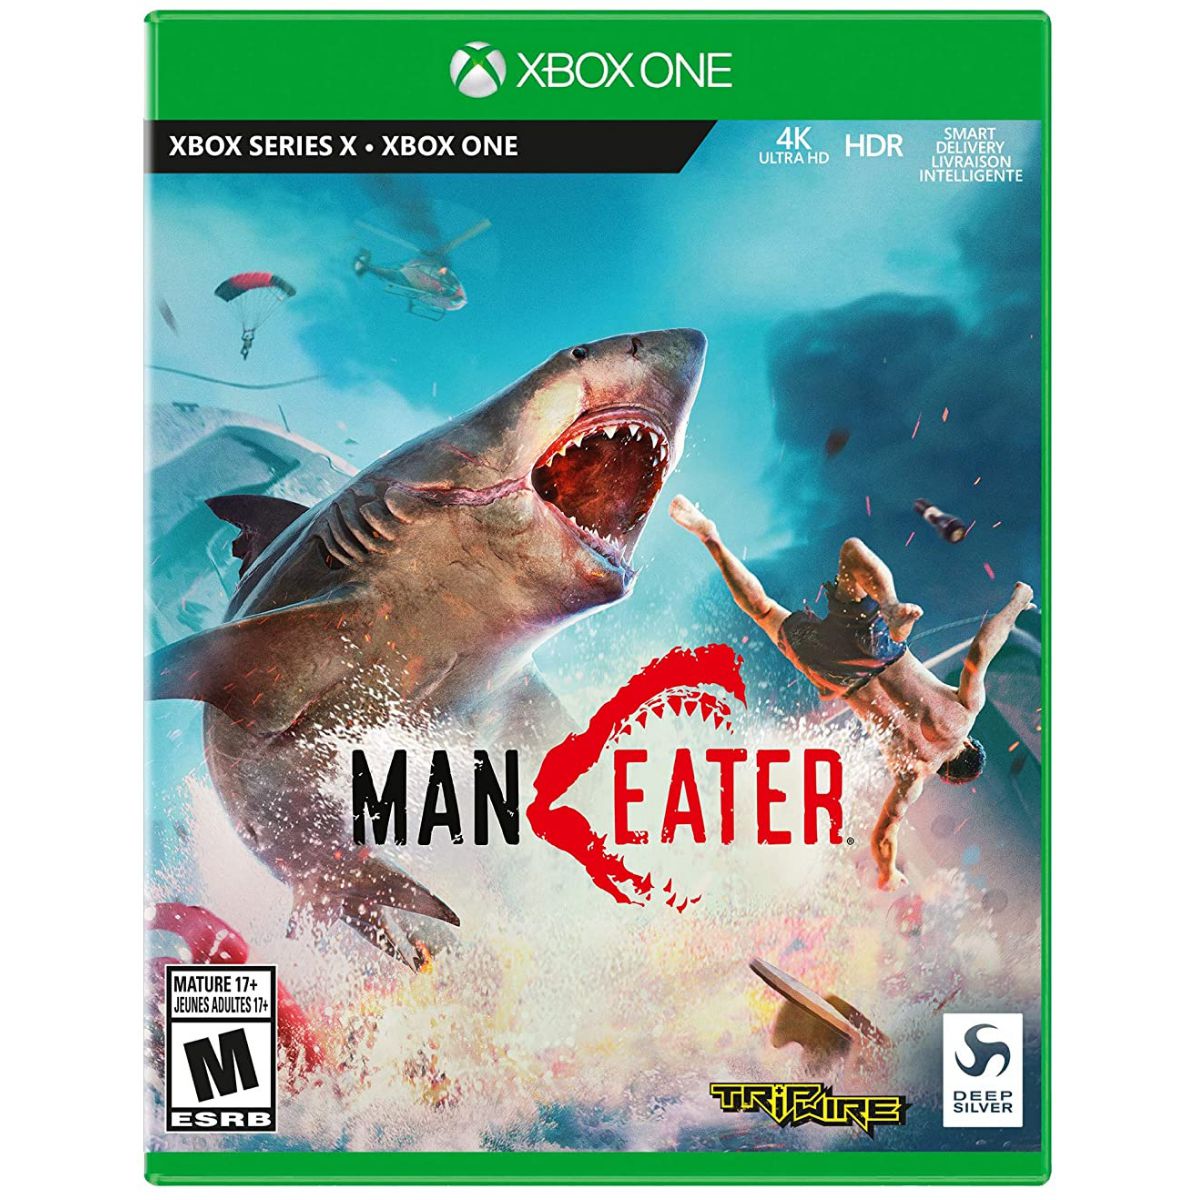 Maneater - Xbox One / Xbox Series X, S - Game Games - Loja de Games Online